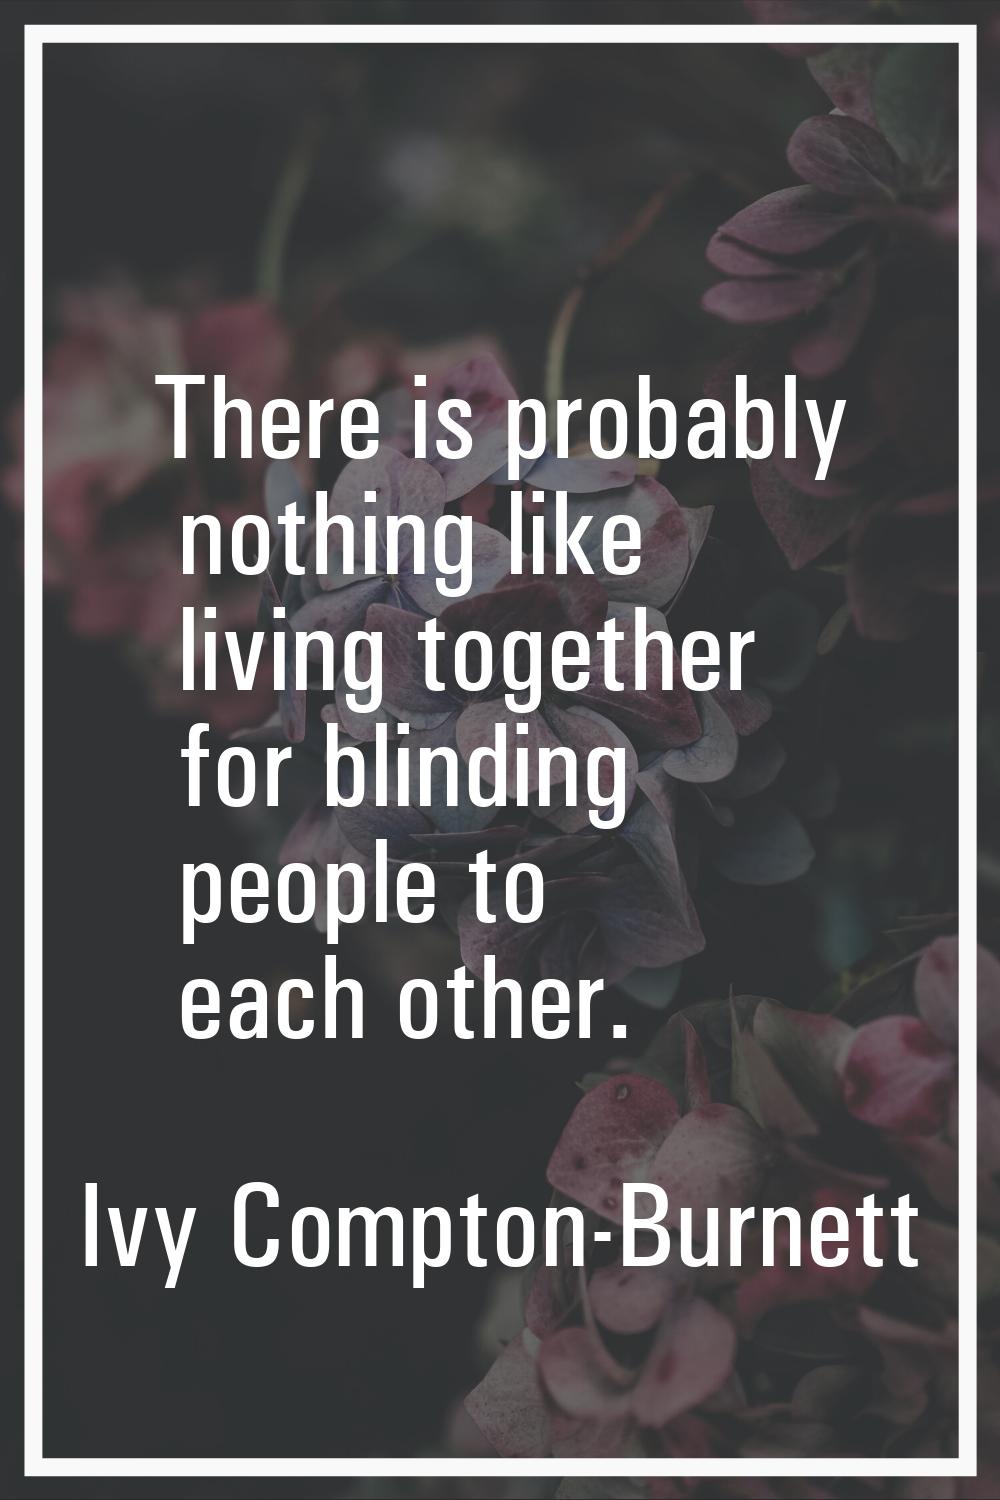 There is probably nothing like living together for blinding people to each other.